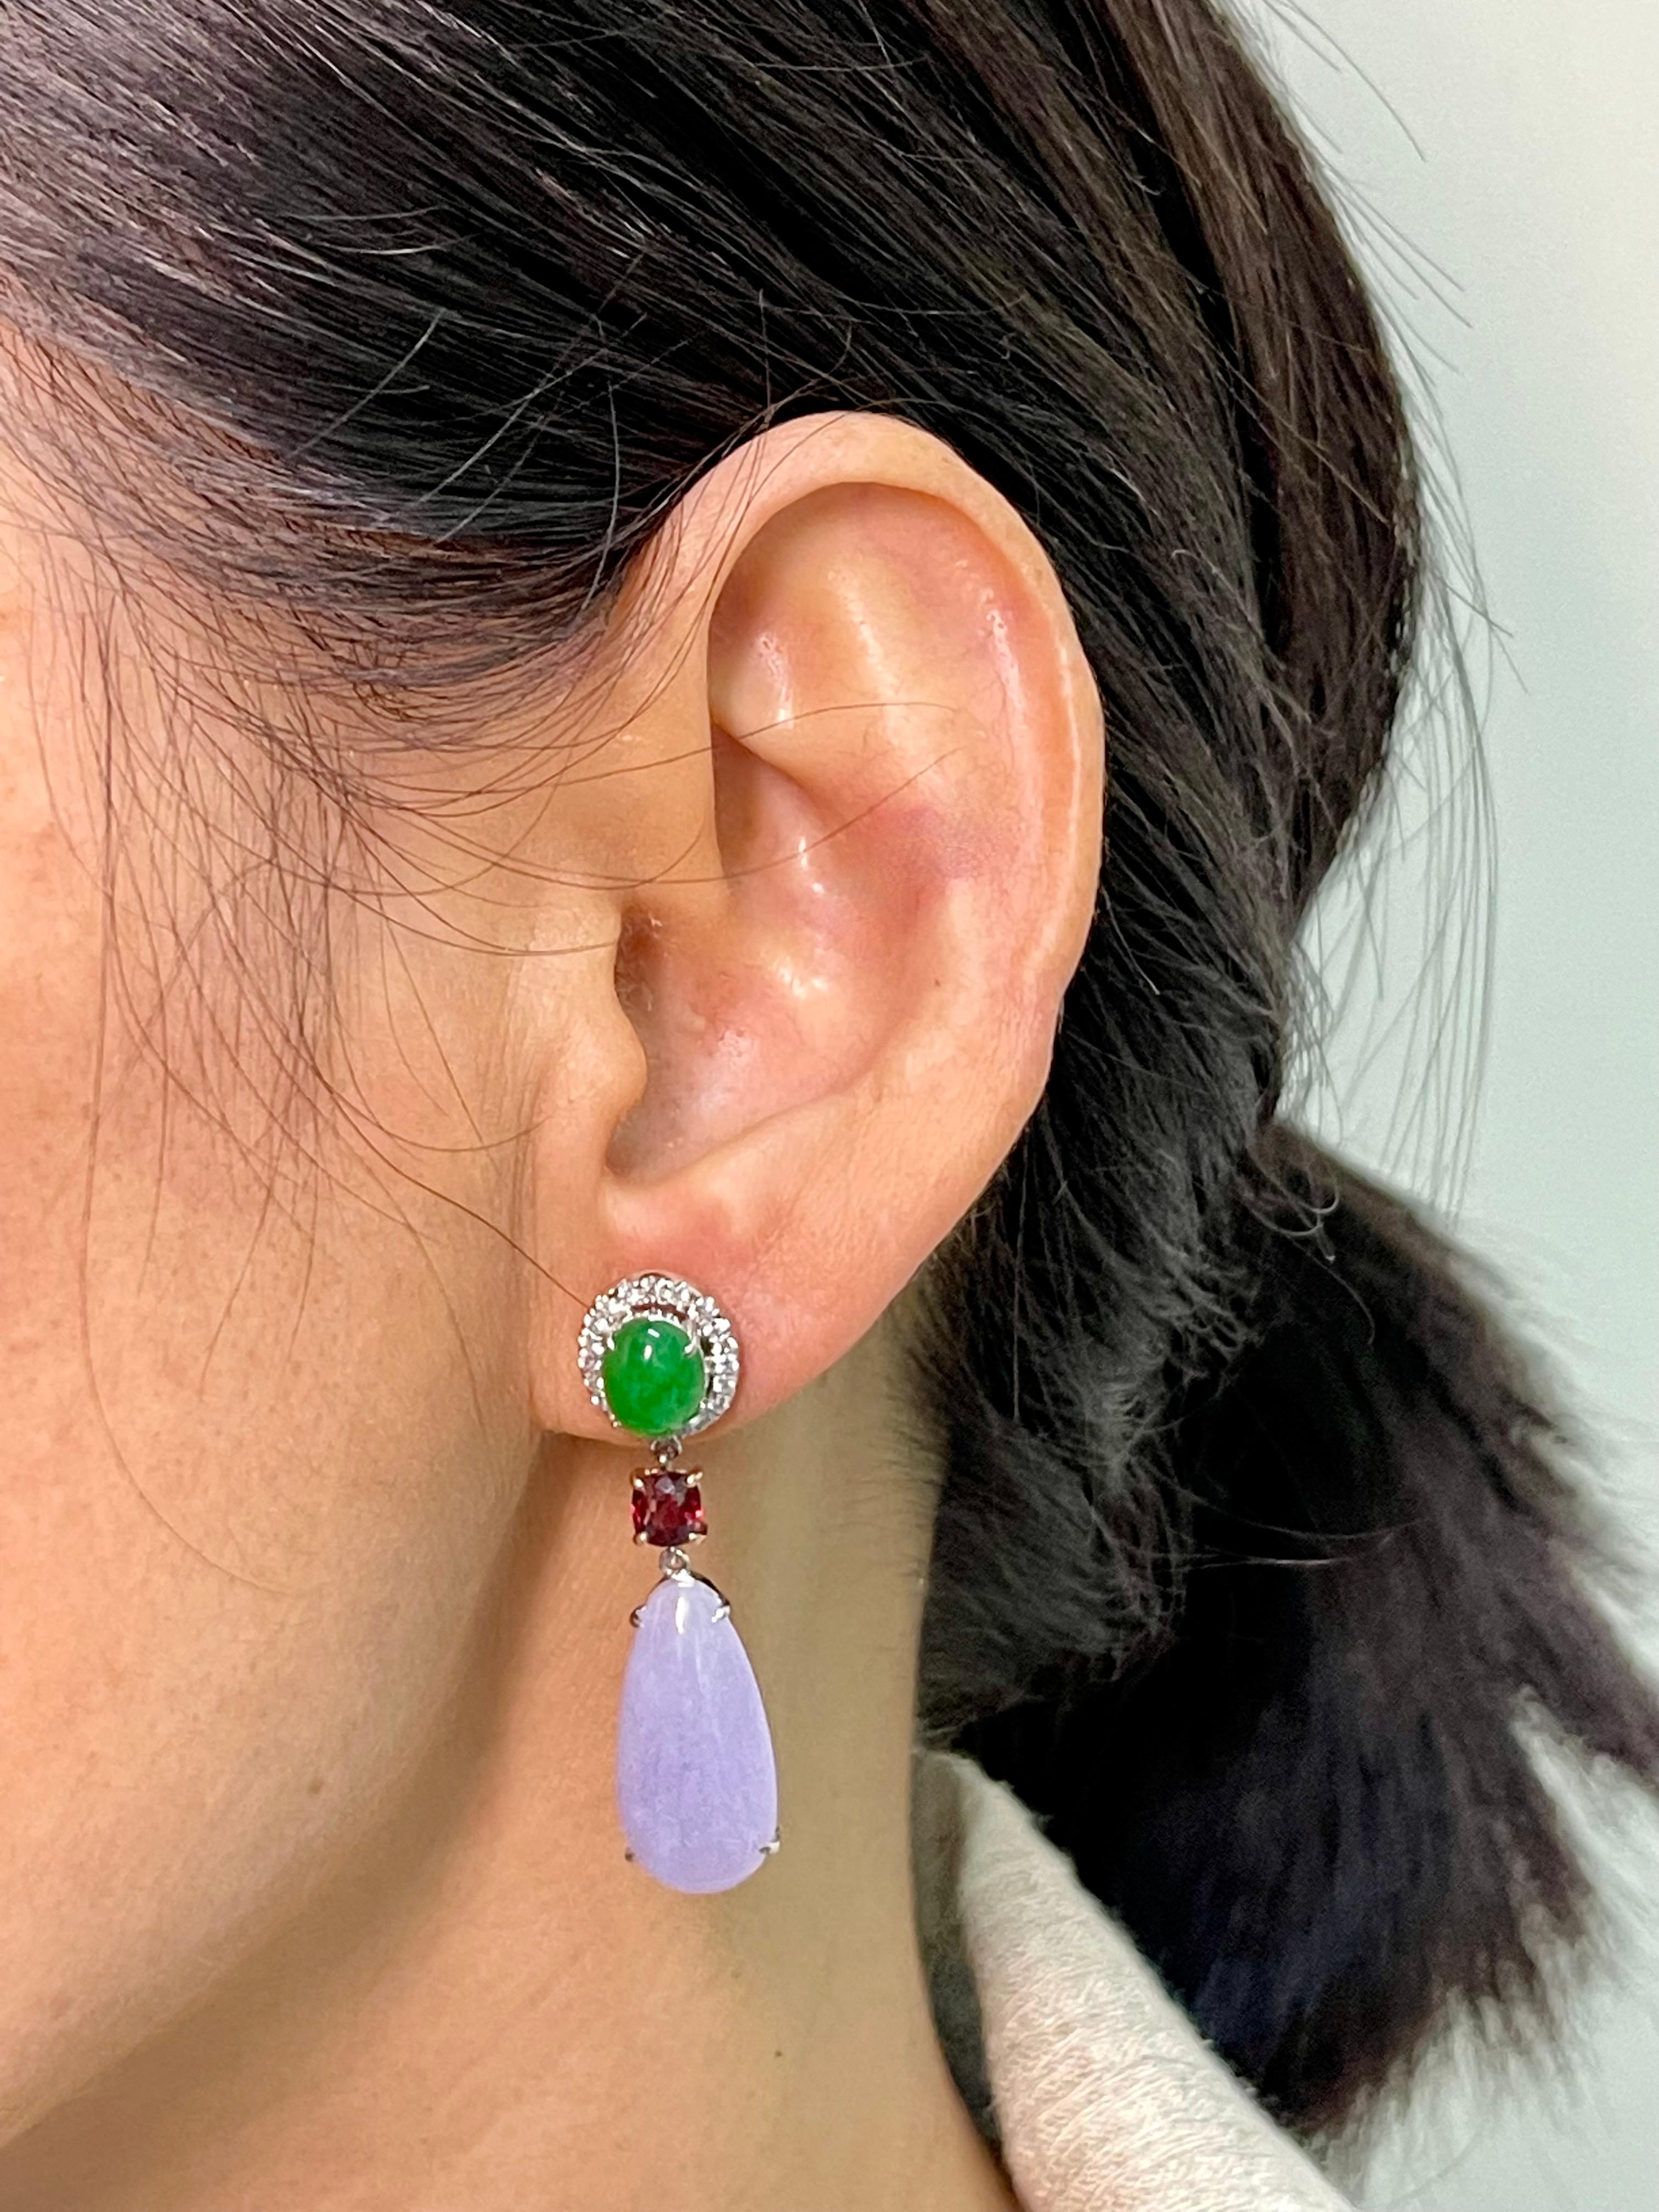 Please check out the HD video. All 4 pieces of jade are certified. These colorful earrings are set in 18k white and rose gold. Starting form the top are 2 apple green jade cabochons (3.35cts) with a halo of diamonds, follow by 2 vivid red spinels